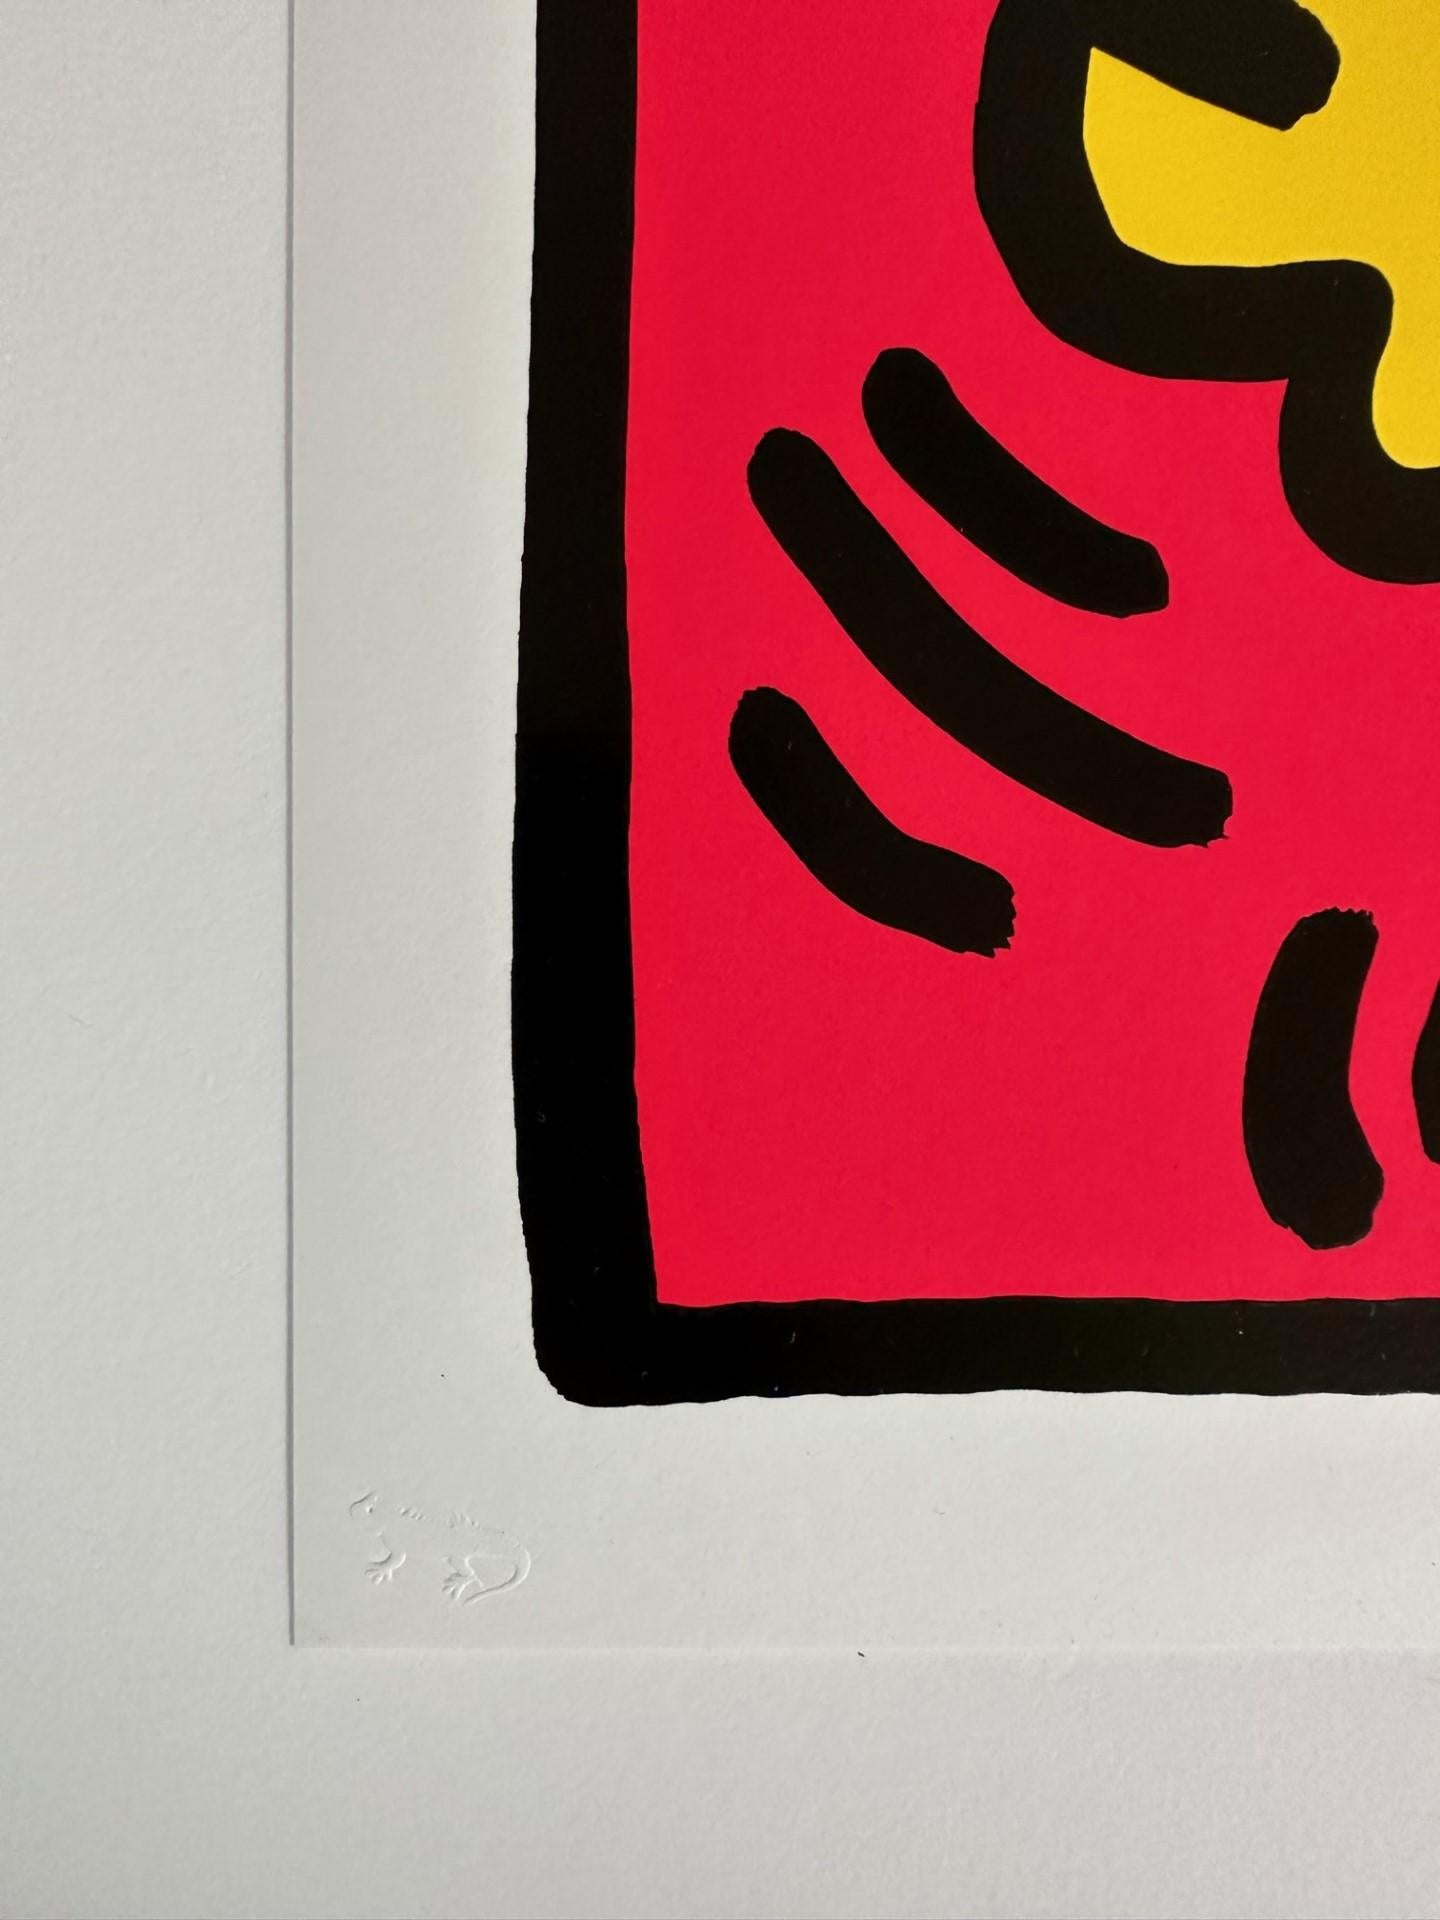 Pop Shop IV (1) - Print by Keith Haring